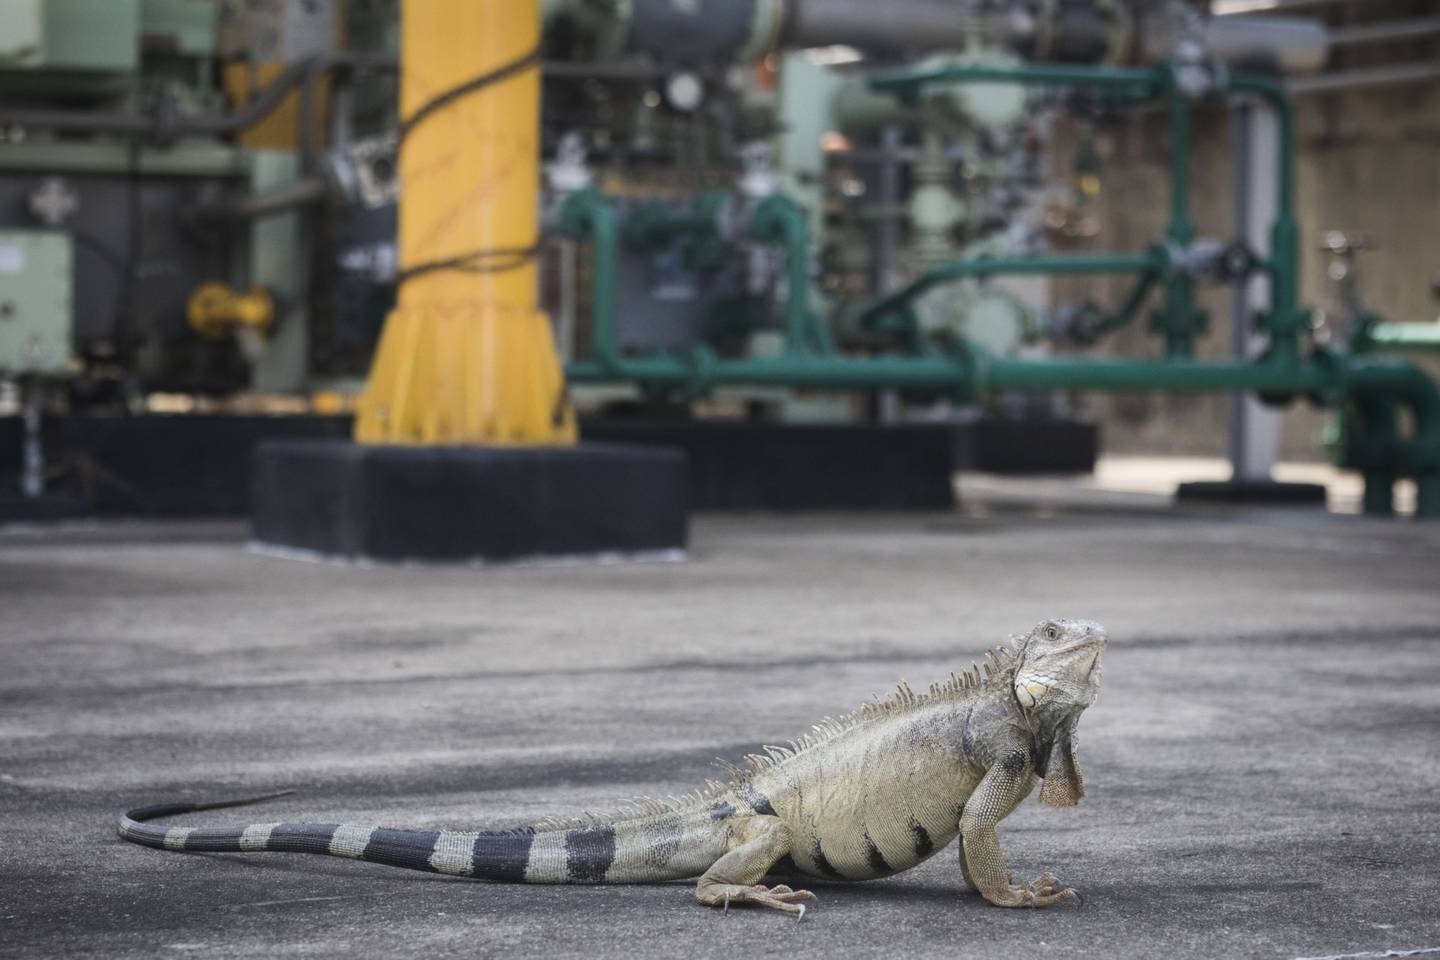 An iguana at the Ecopetrol Barrancabermeja refinery in Barrancabermeja, Colombia. Even before Gustavo Petro was elected, Ecopetrol had committed to reducing net carbon emissions to zero by 2050.